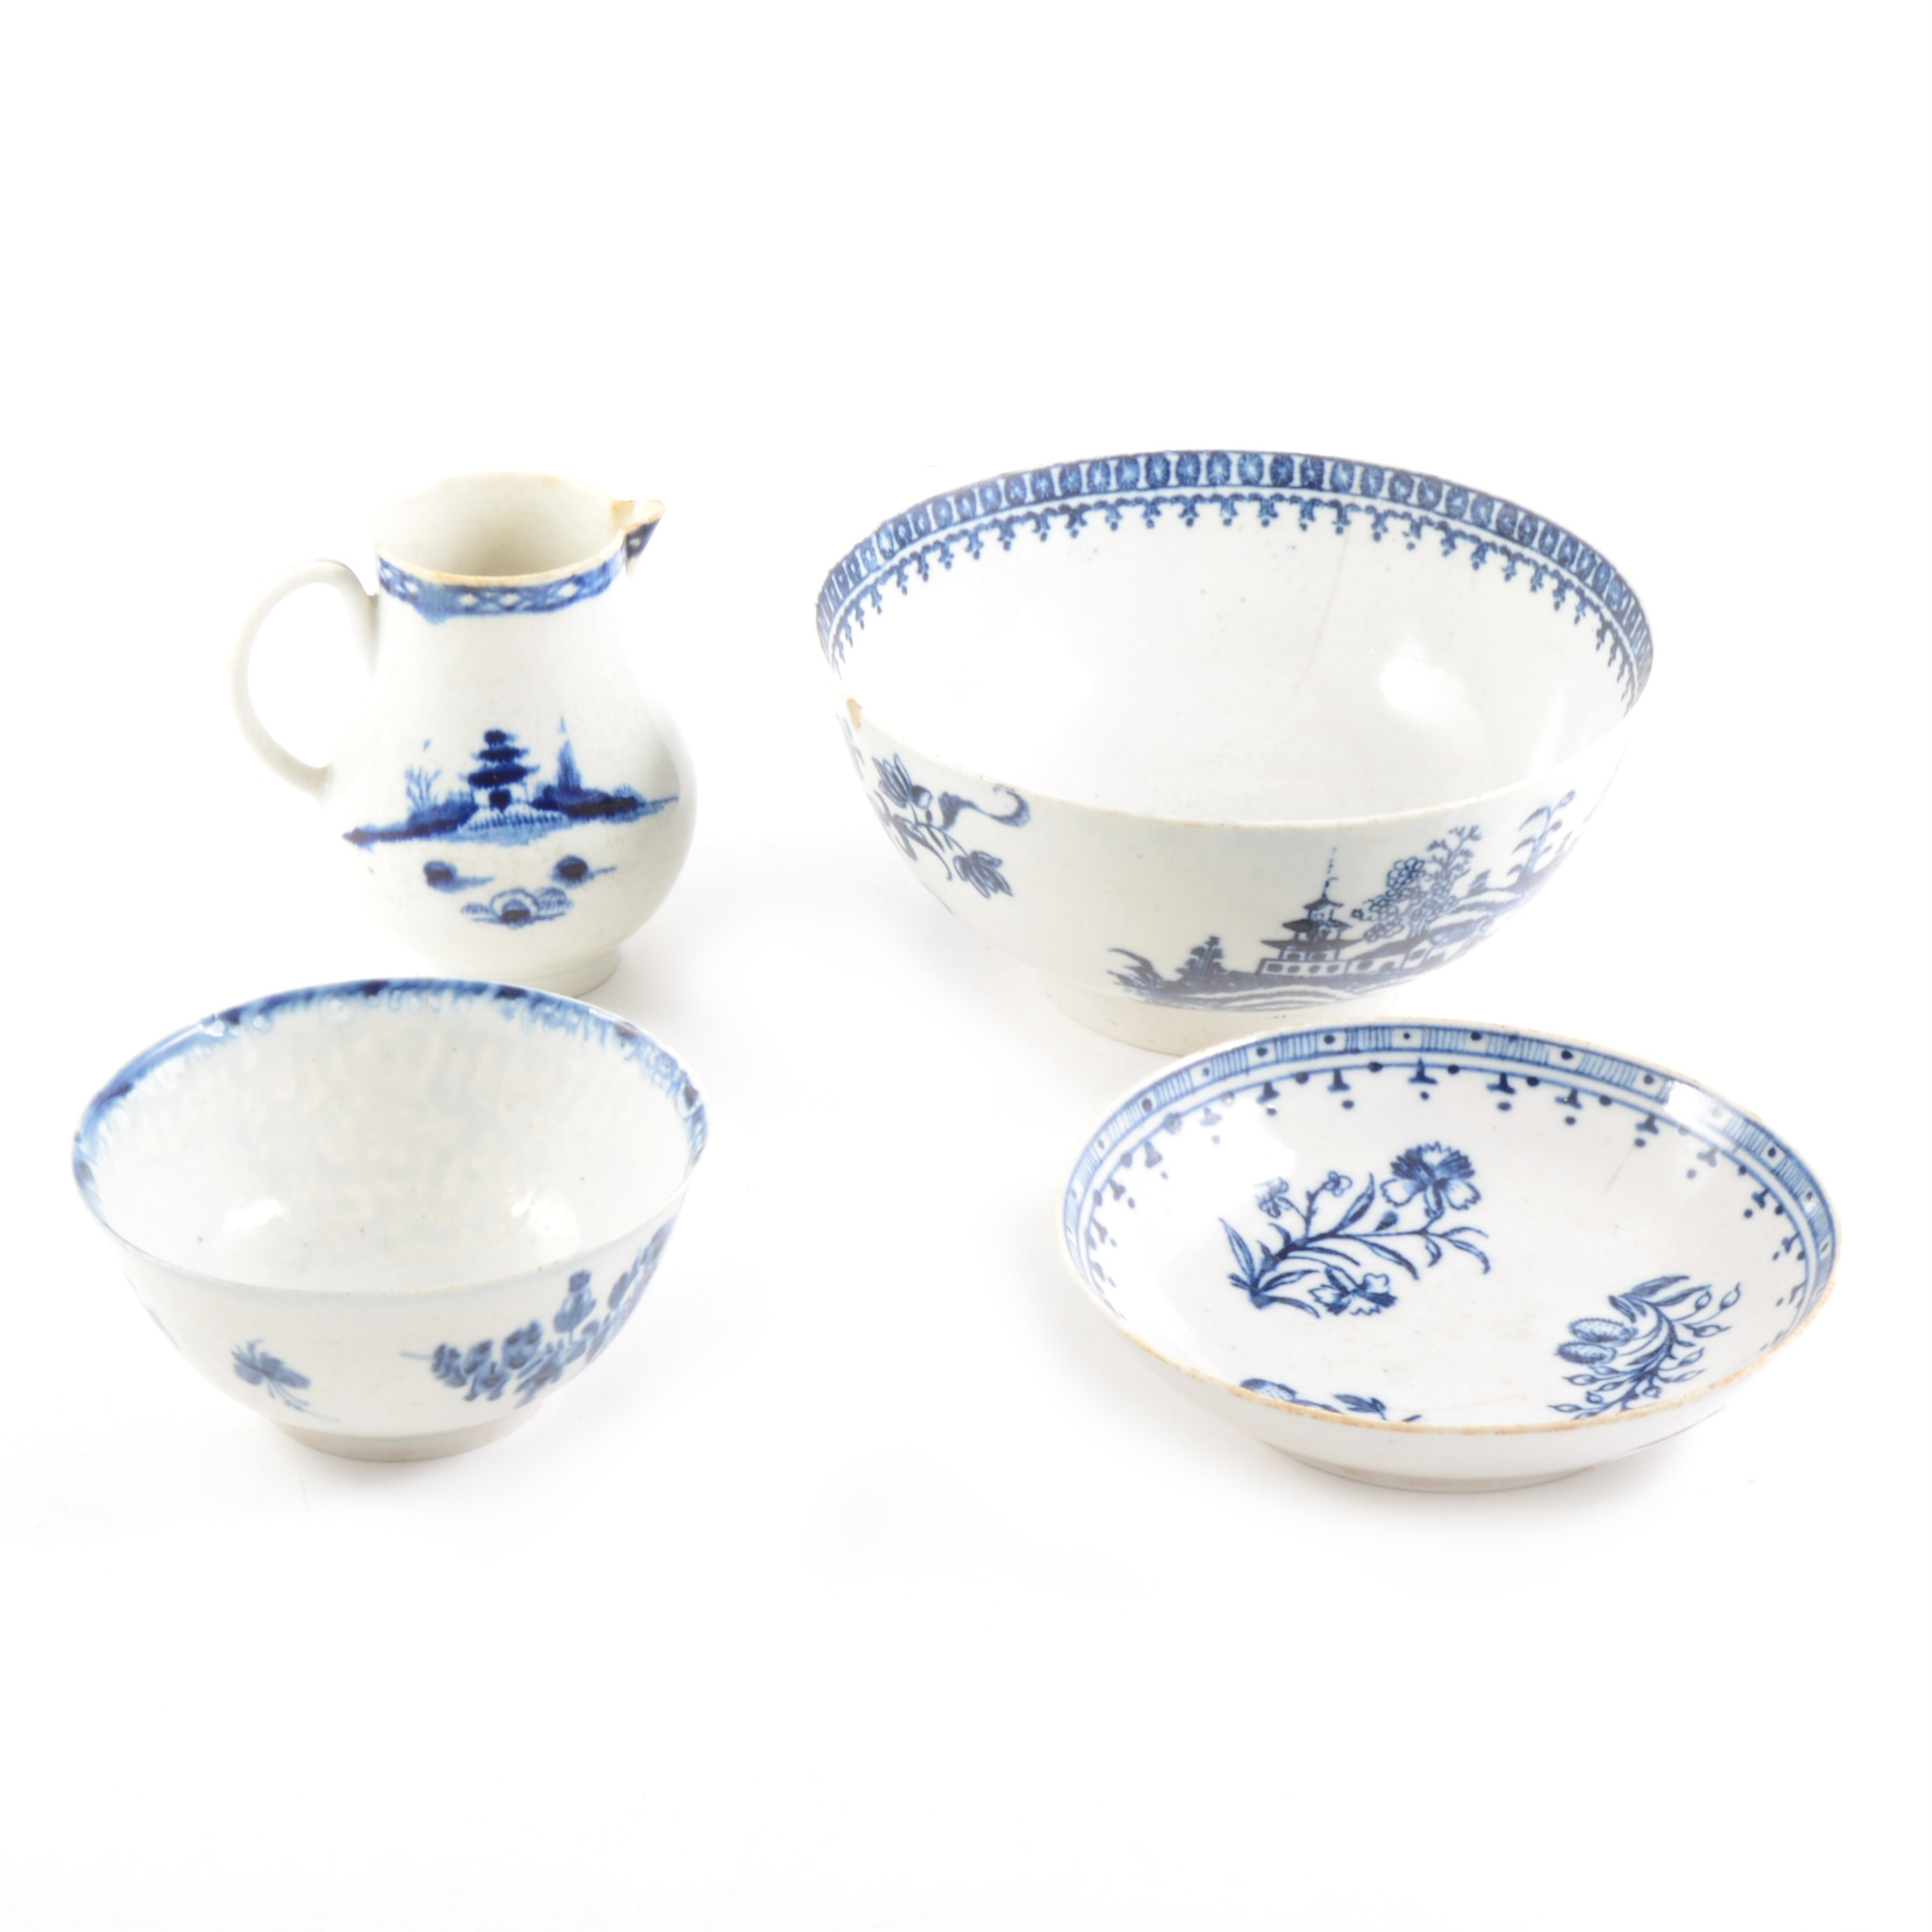 Worcester jug, 18th Century, blue and white, a similar saucer and two bowls, all damaged